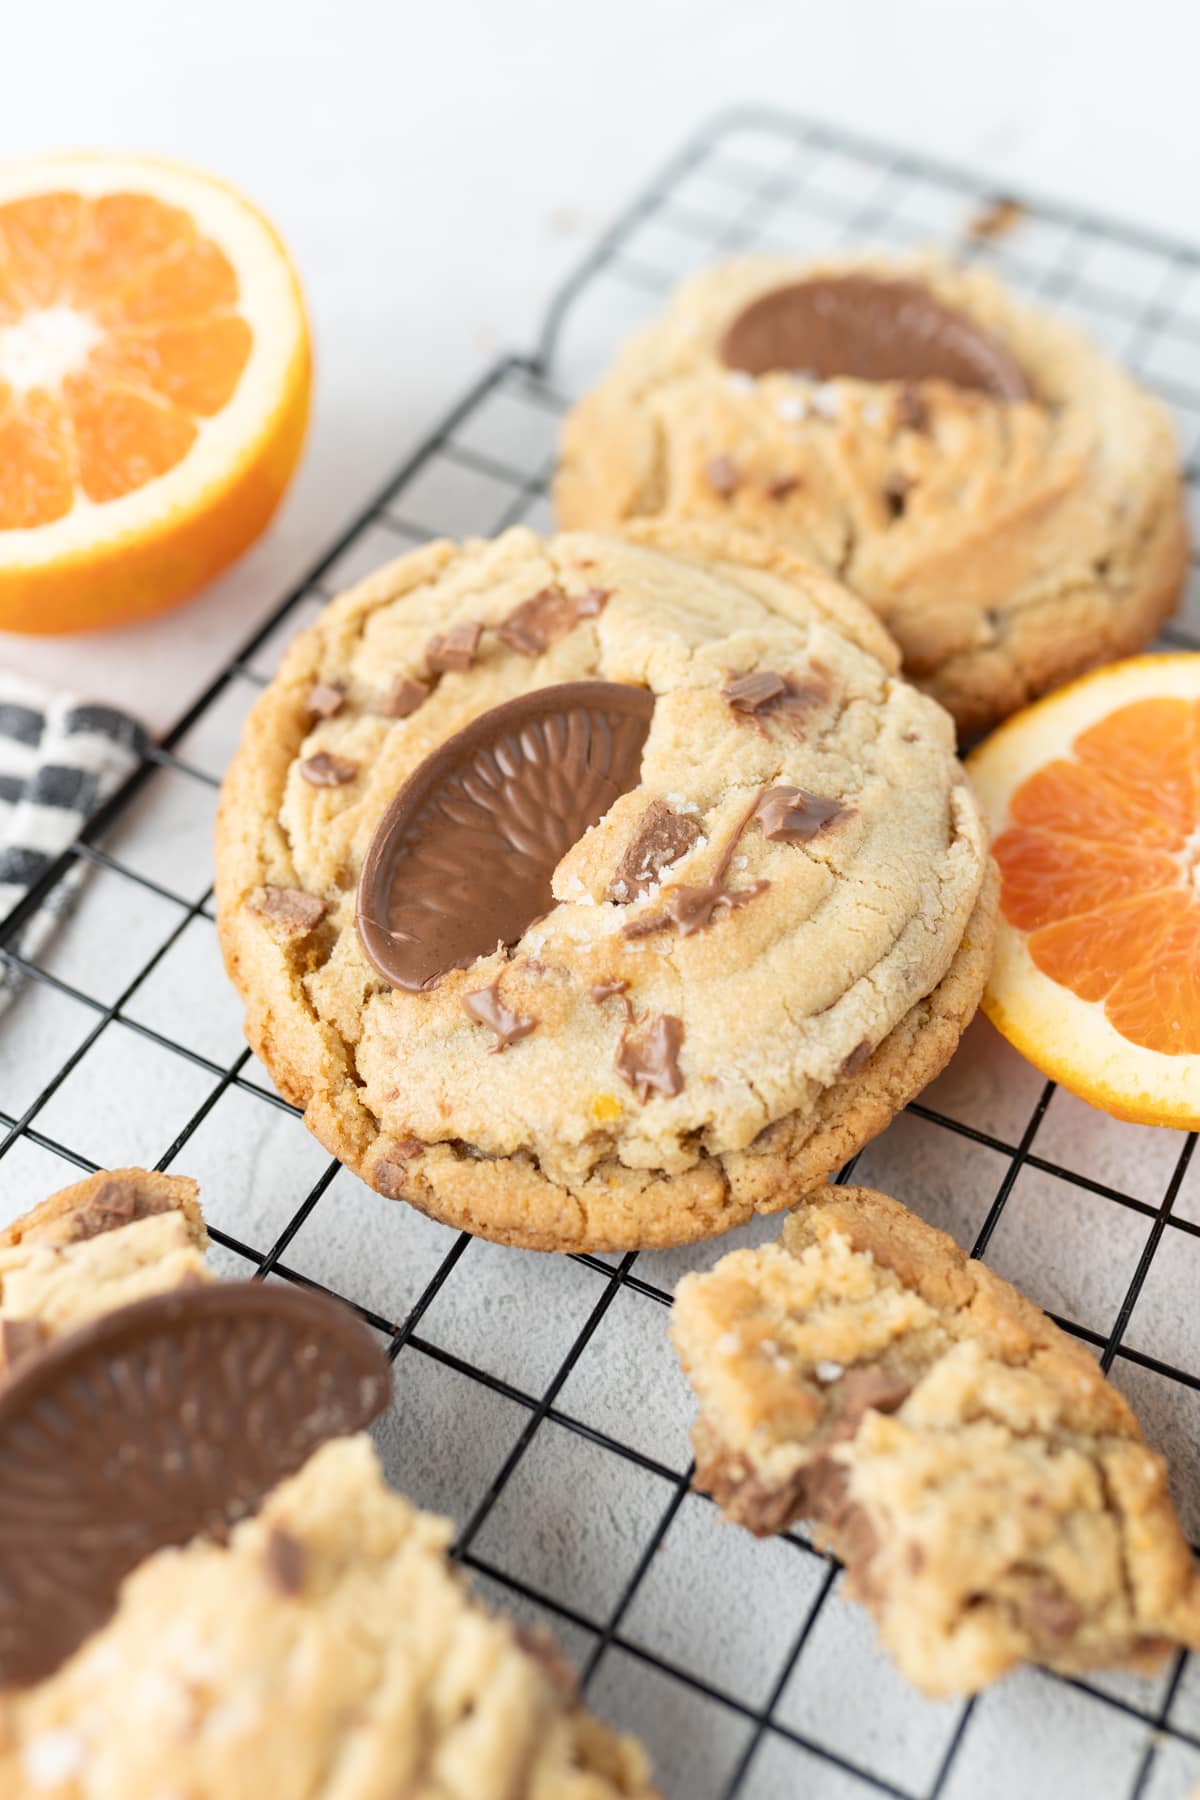 Image of chocolate orange cookies on a wire cooling rack with orange slices and chocolate orange slices. 